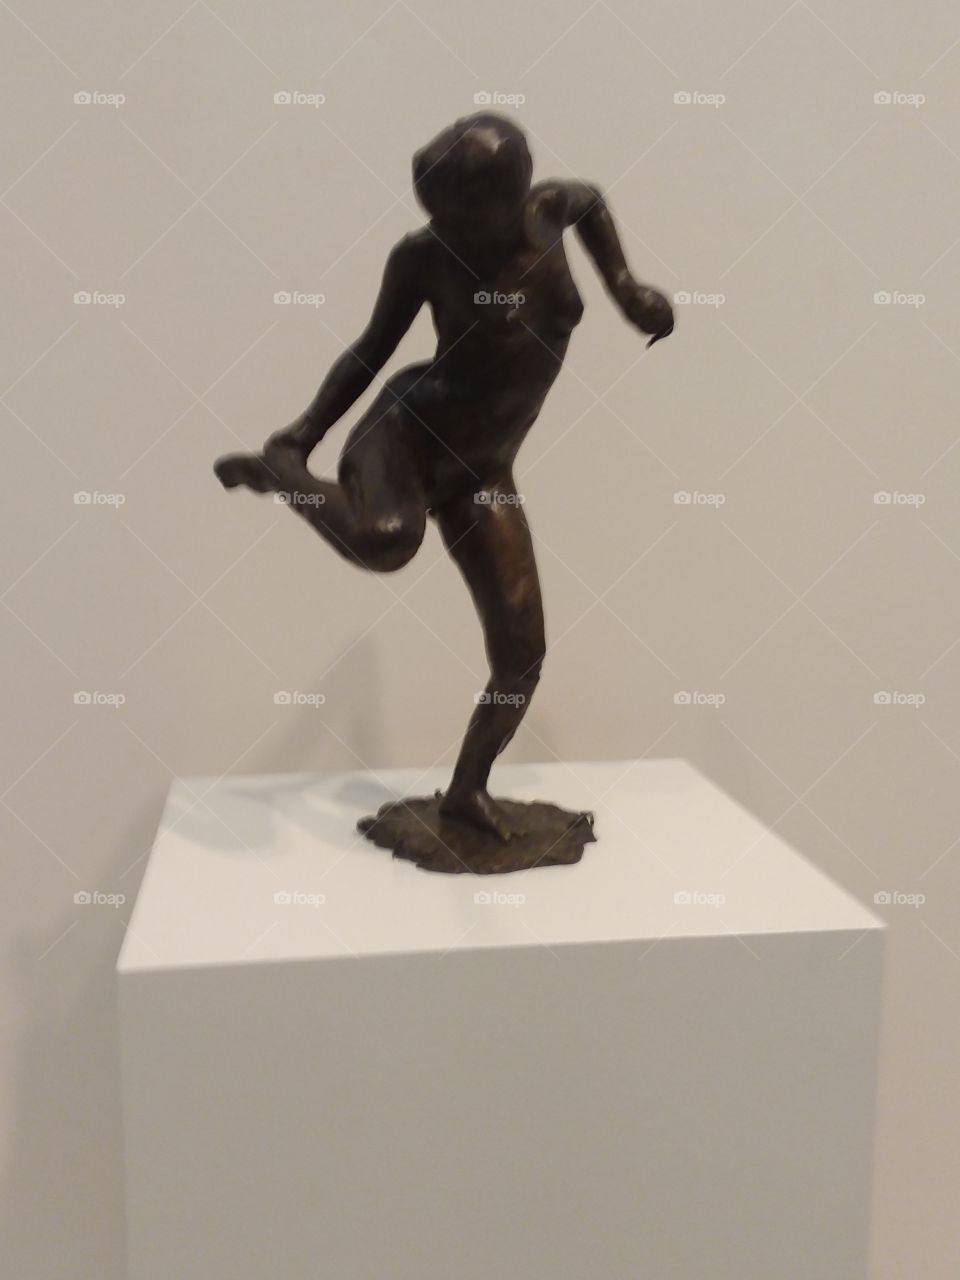 modern museum holding a breakdancing, permanently young man